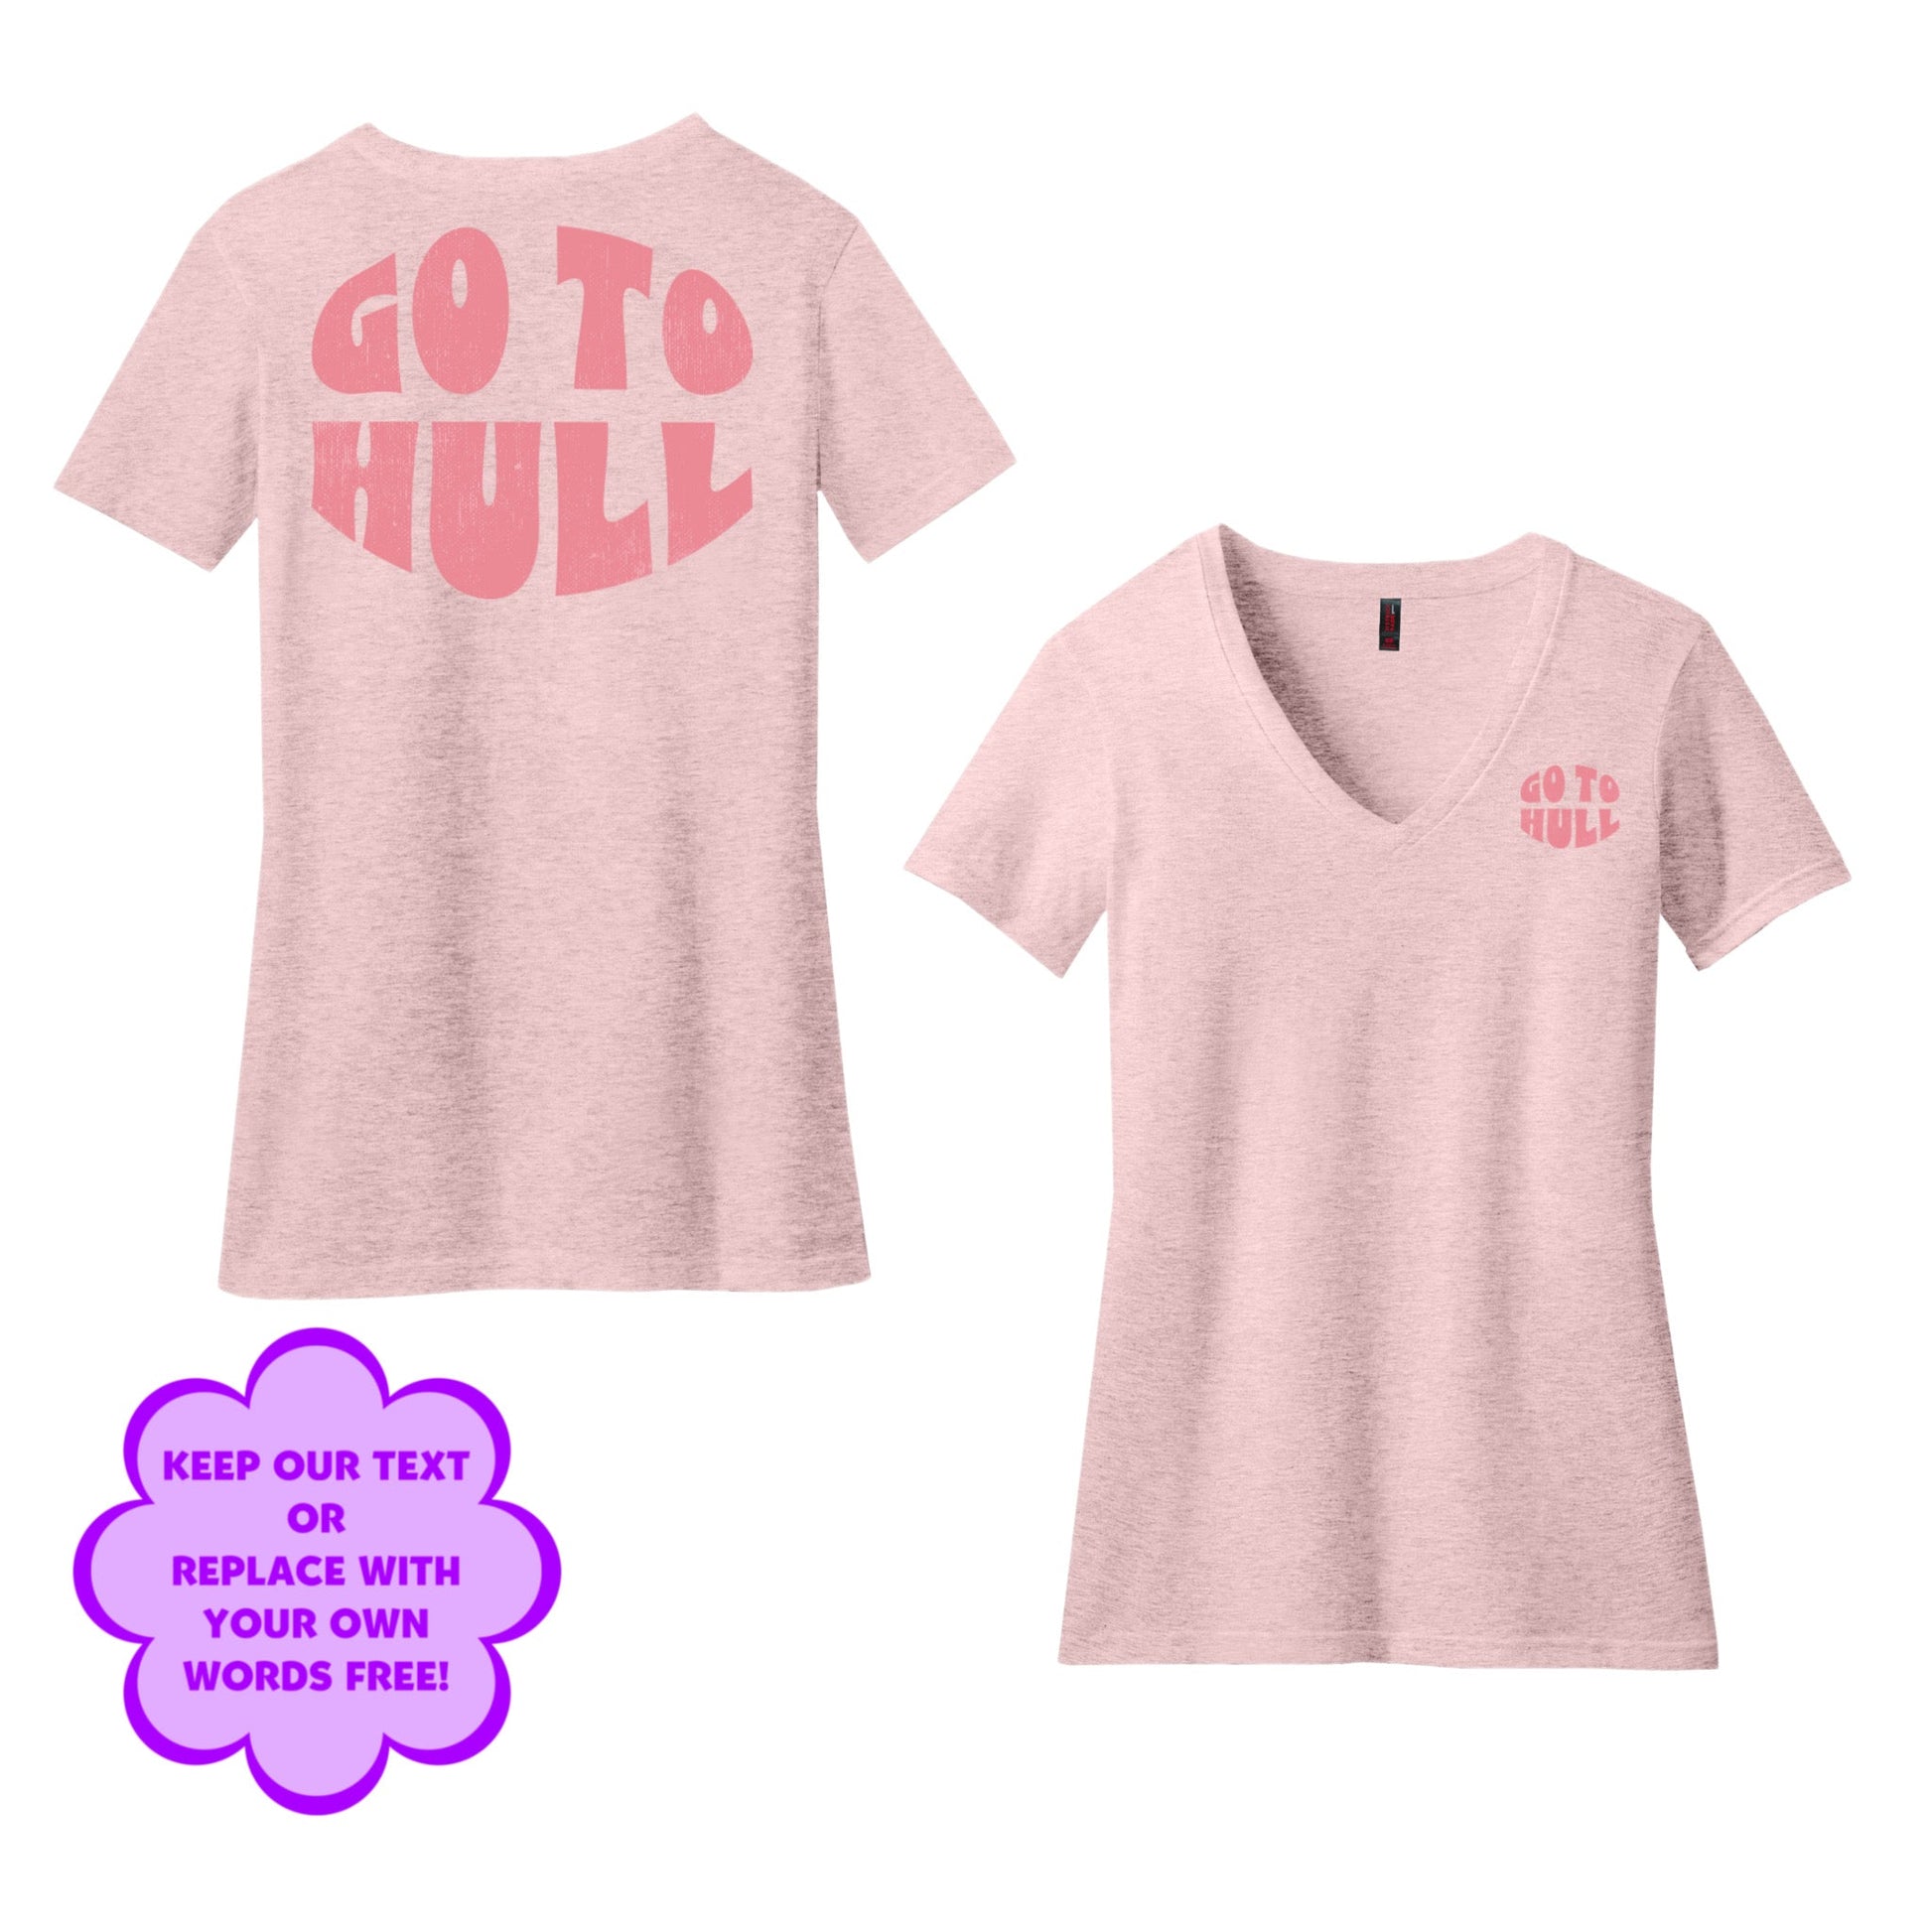 Personalize Free Go to Hull, Women’s Cotton Tees from Baby Squid Ink 